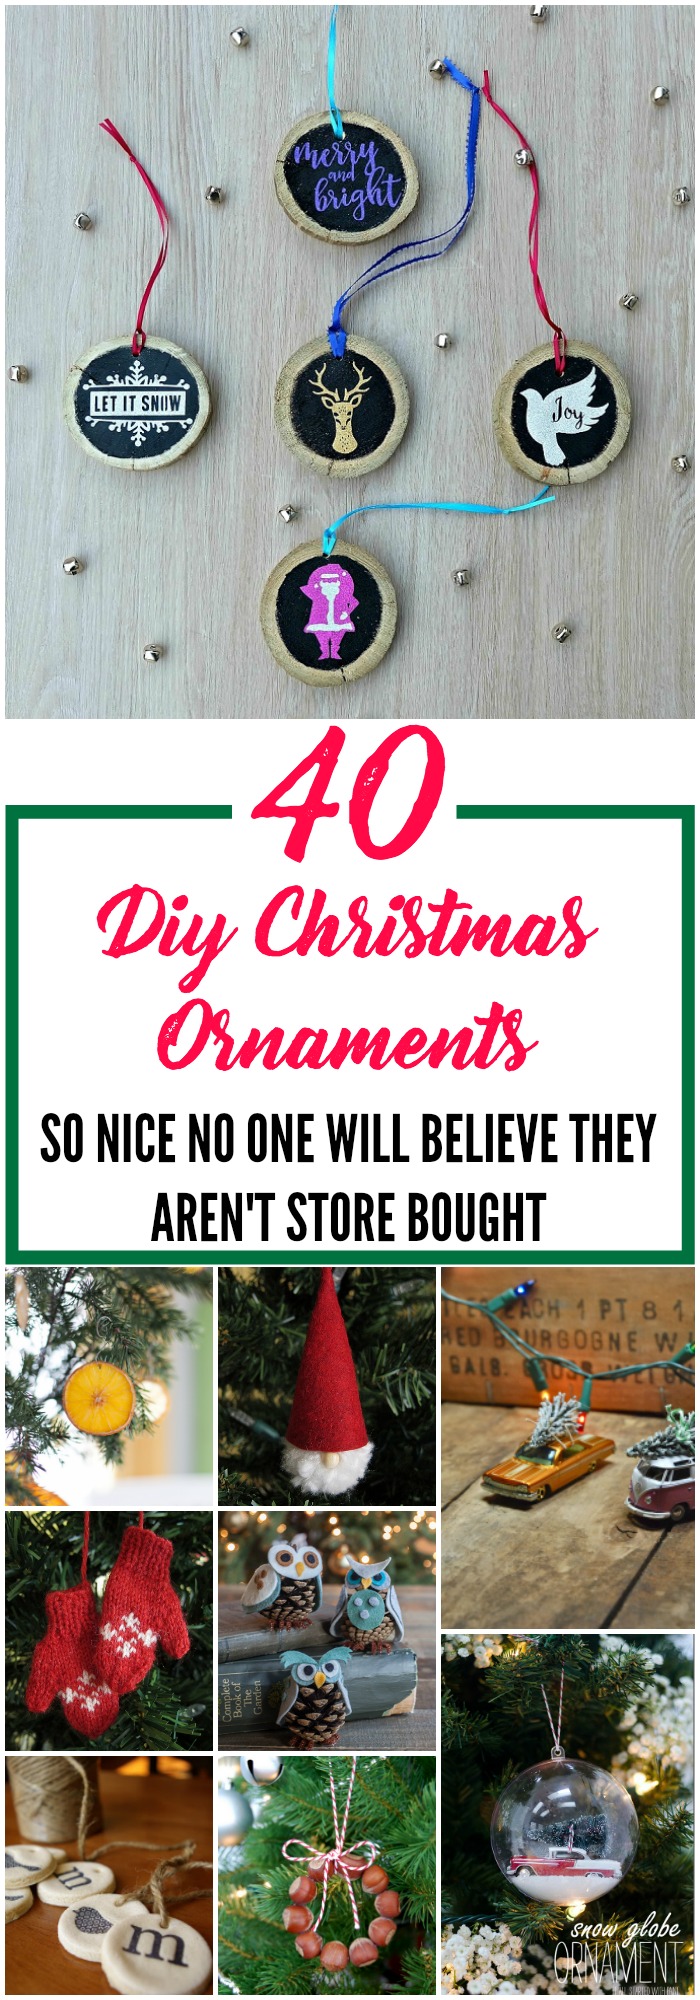 40 Easy DIY Christmas Ornaments to personalize your holiday decor